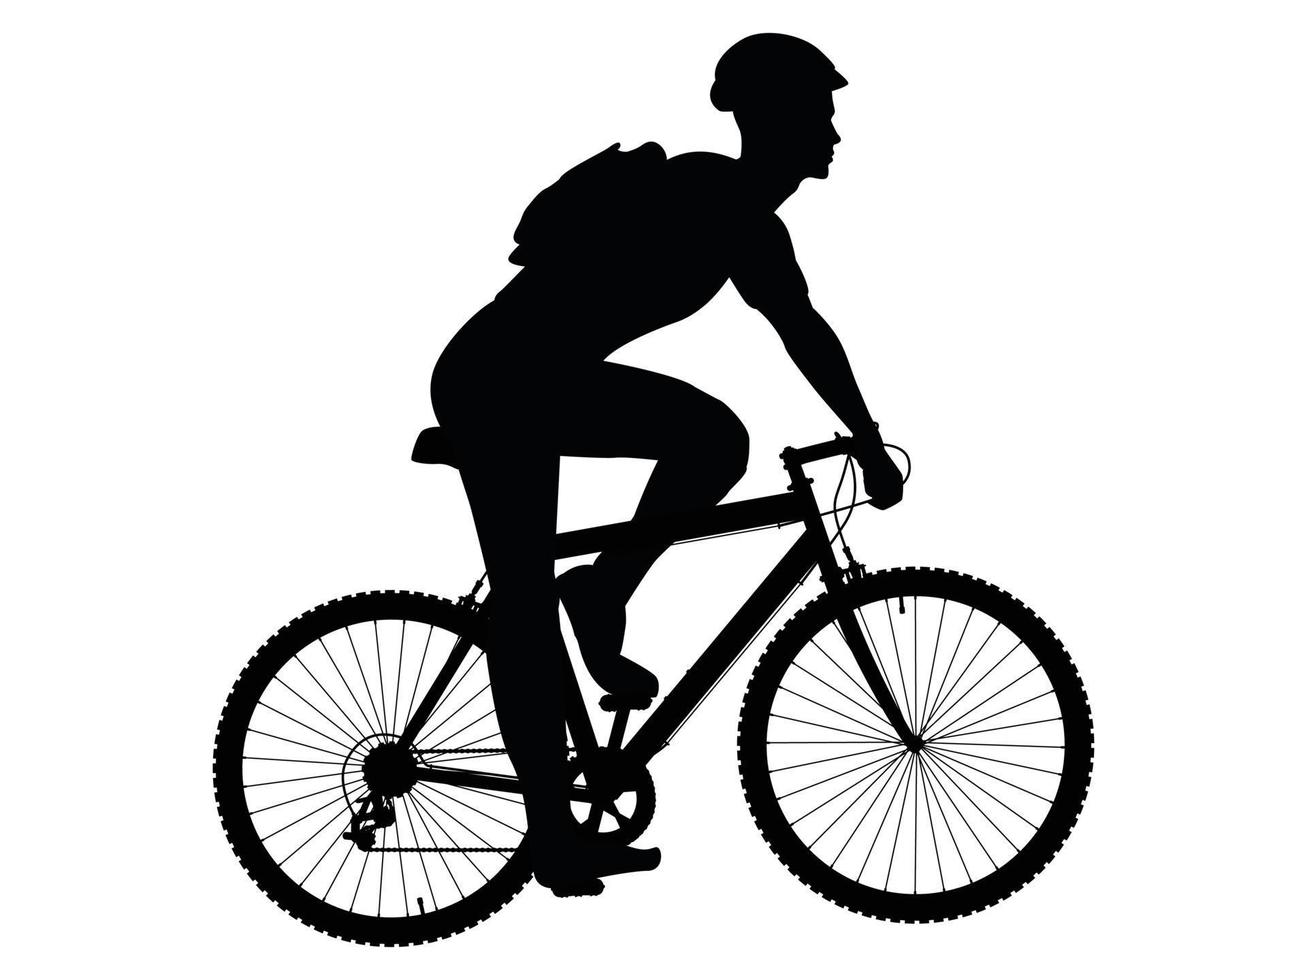 Black silhouette set of cycling bicycle silhouettes vector